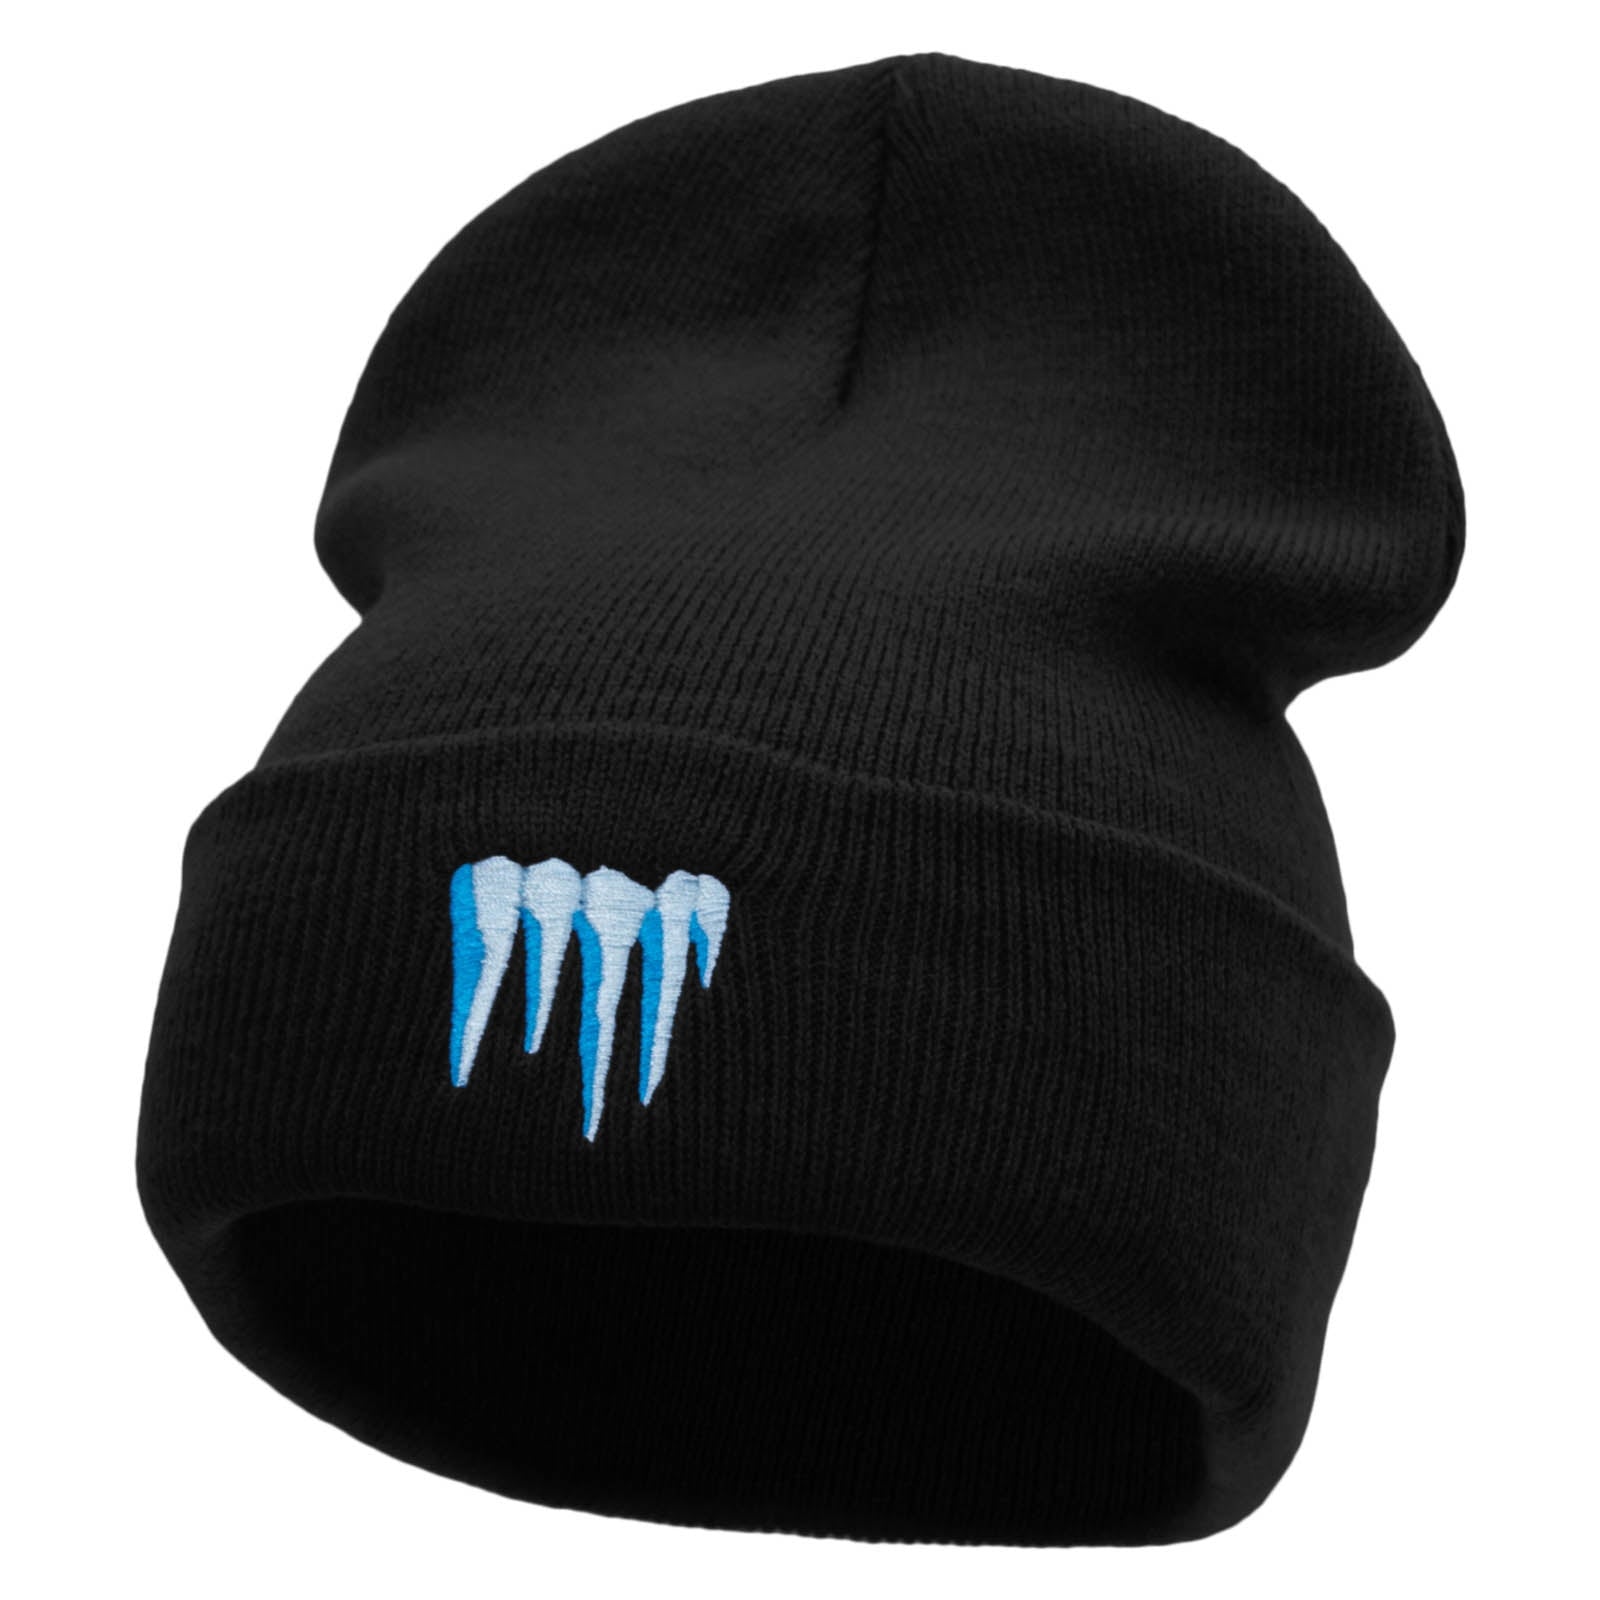 Frozen Ice Embroidered 12 Inch Long Knitted Beanie - Black OSFM